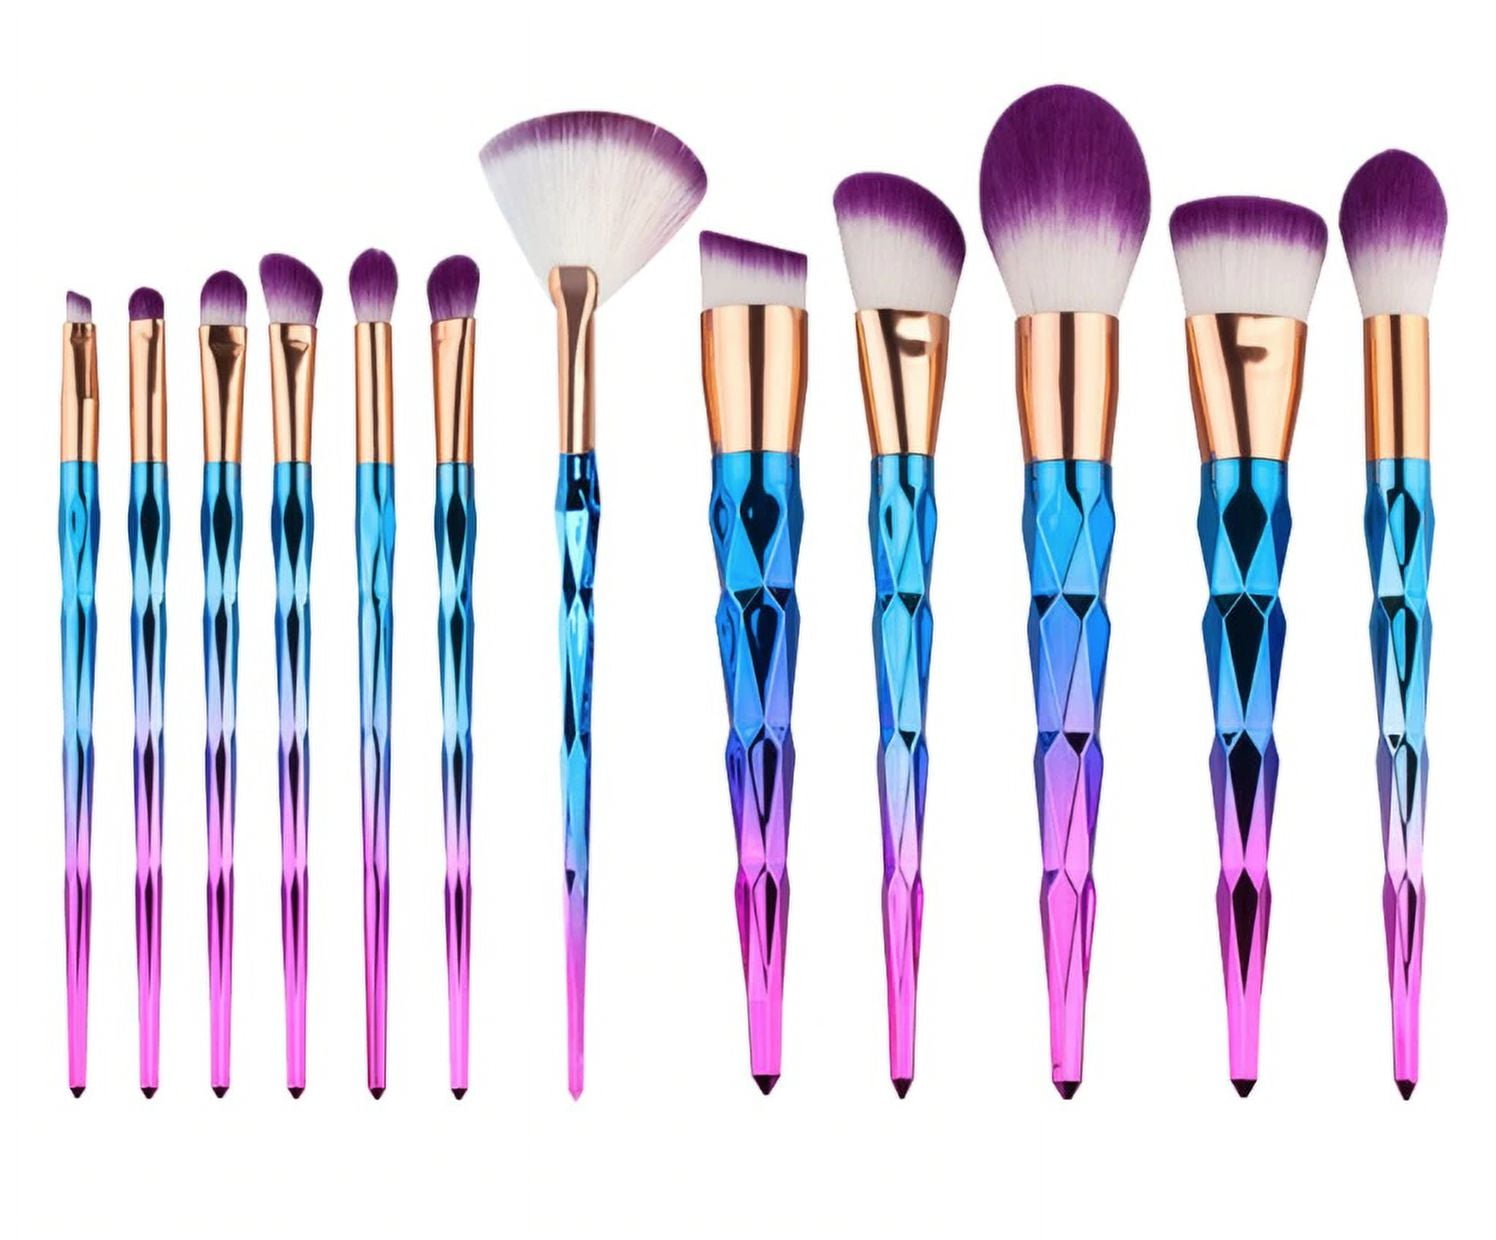 Unicorn Horn Makeup Brushes And Storage Box - GEEKYGET